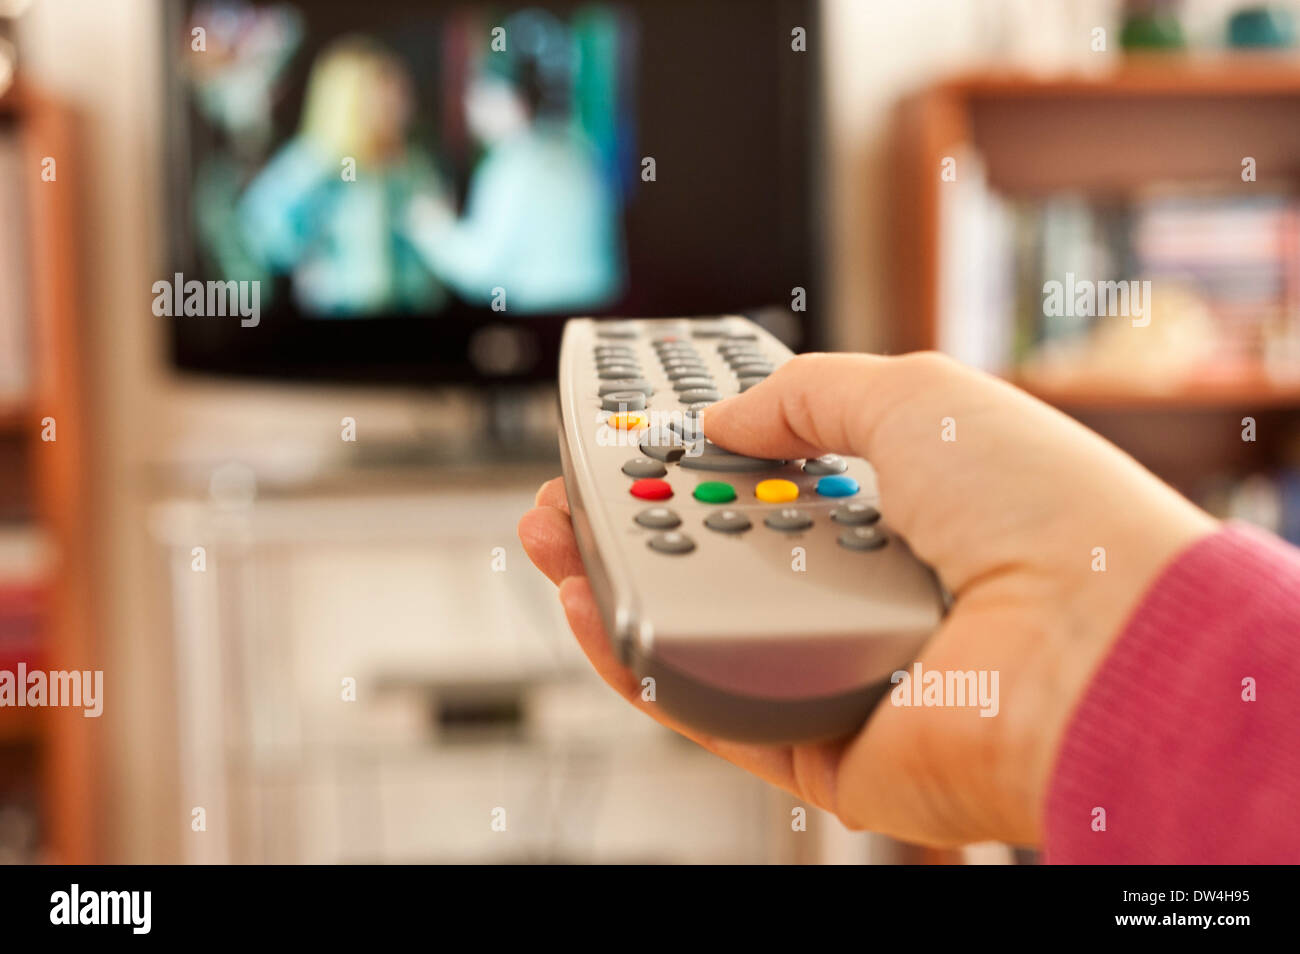 hand holding a remote control in front of television screen Stock Photo